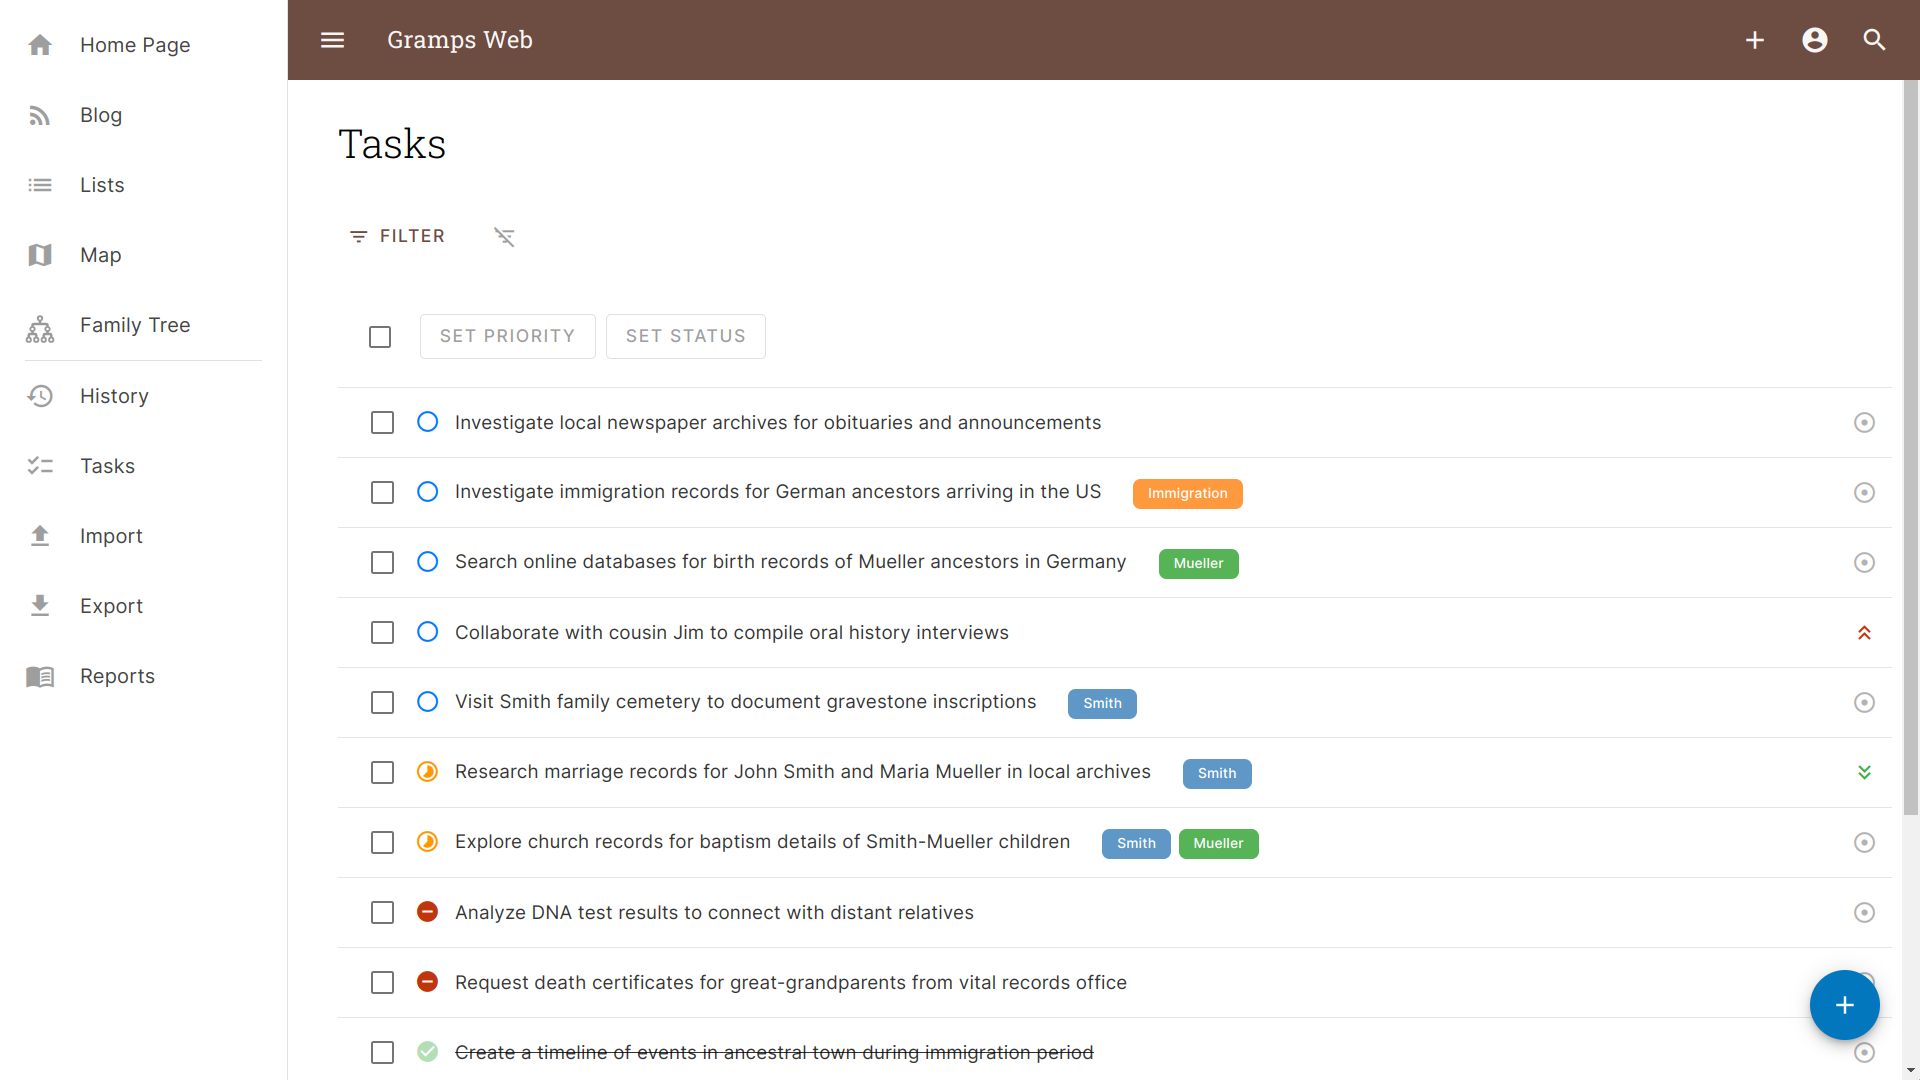 Plan and Organize your Research: Gramps Web as Task Management App